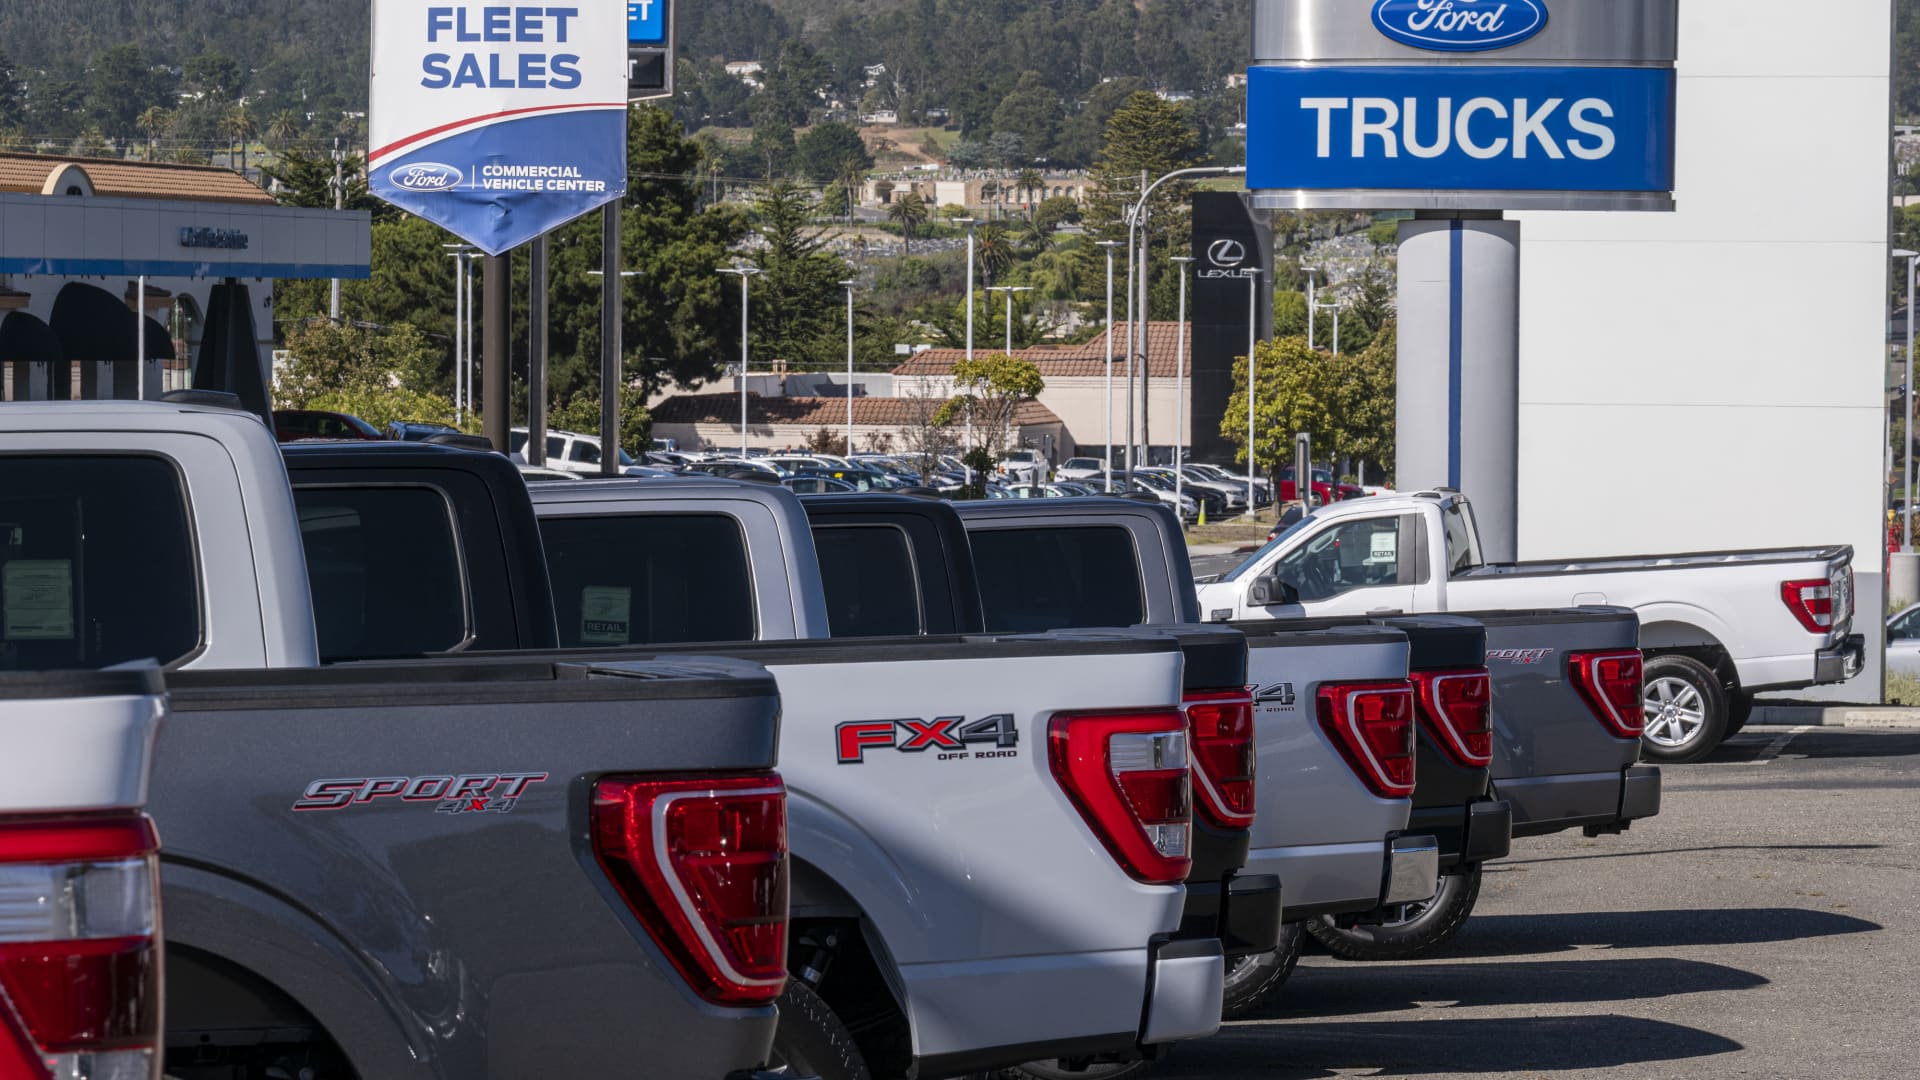 Ford’s October sales slide 10% amid supply chain issues